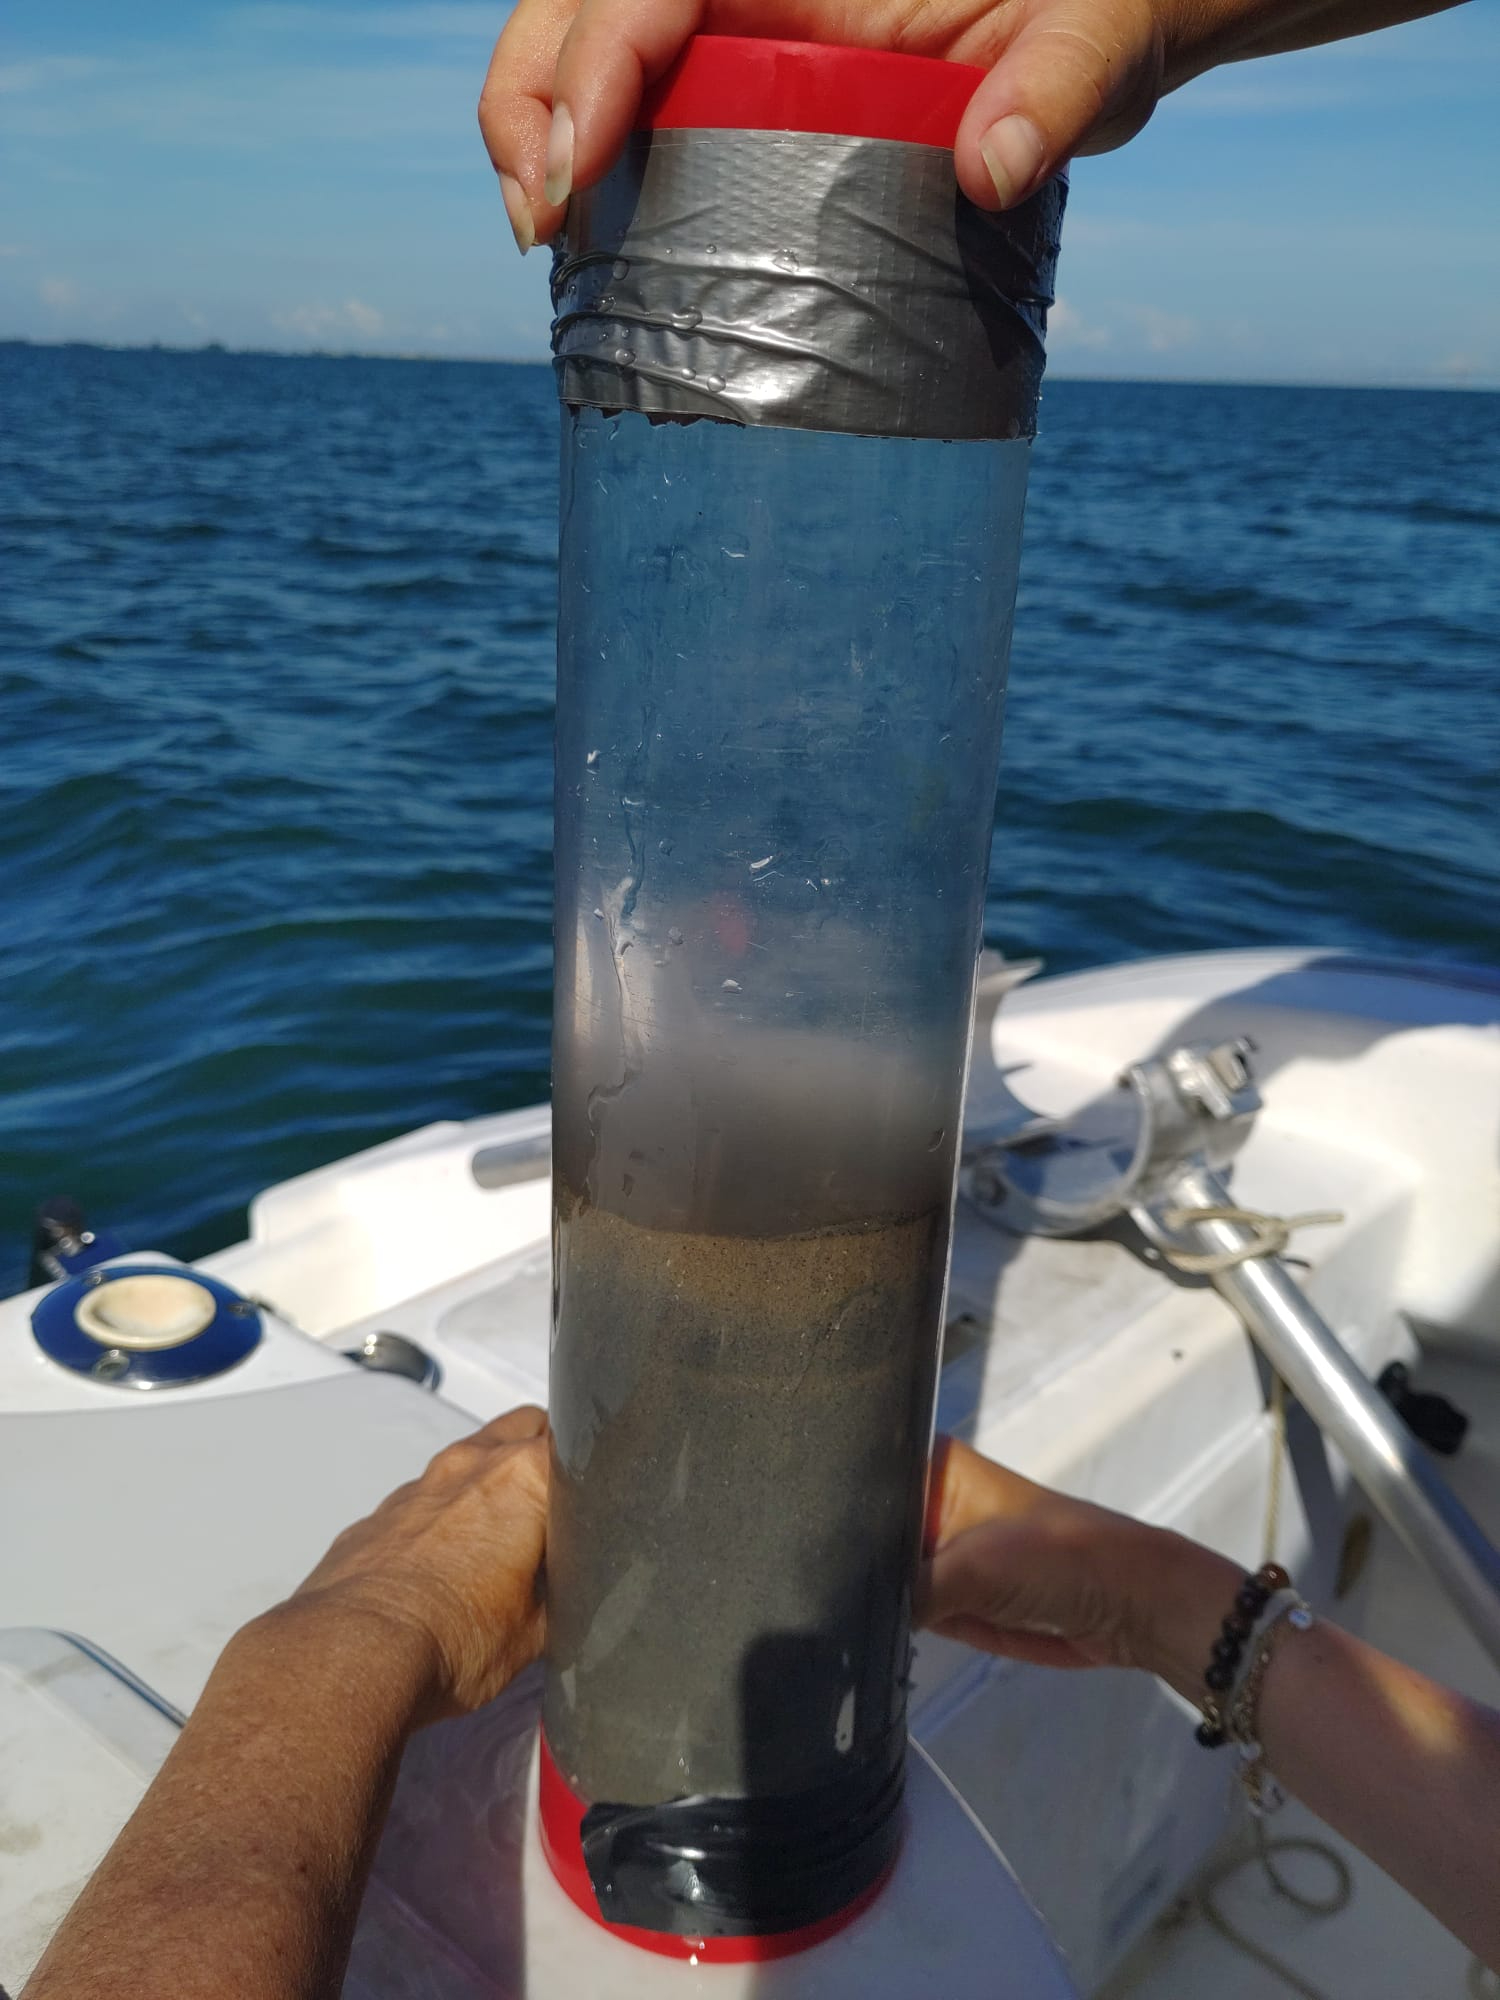 One of the push cores at Old Tampa Bay. Dark sediment is anoxic (without oxygen).